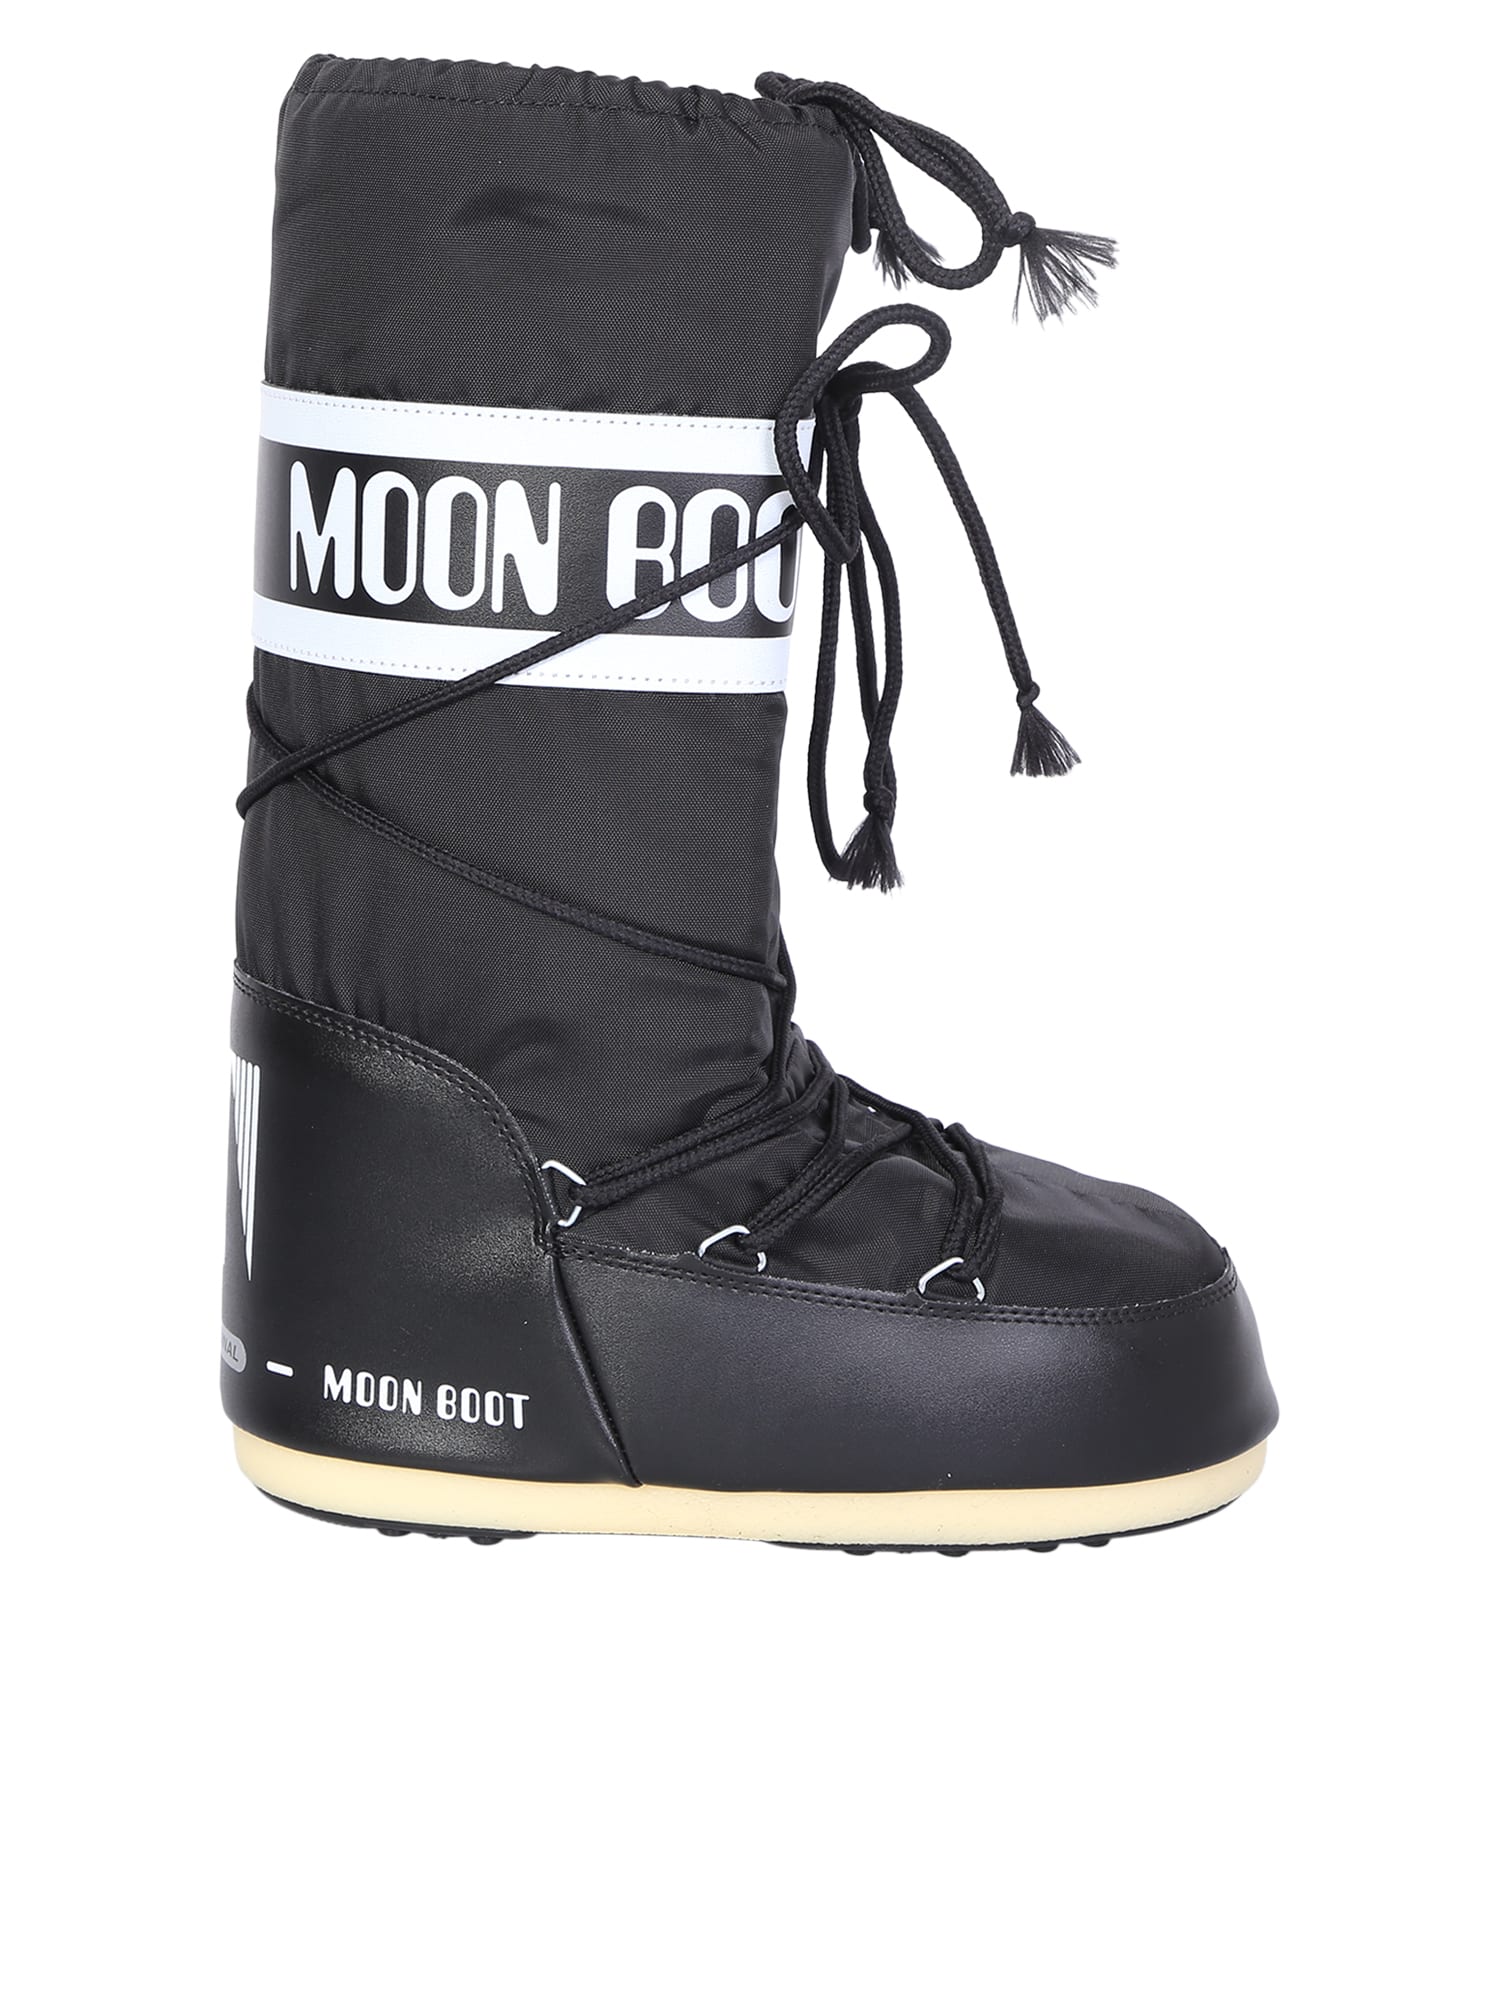 MOON BOOT BLACK ICON BOOTS